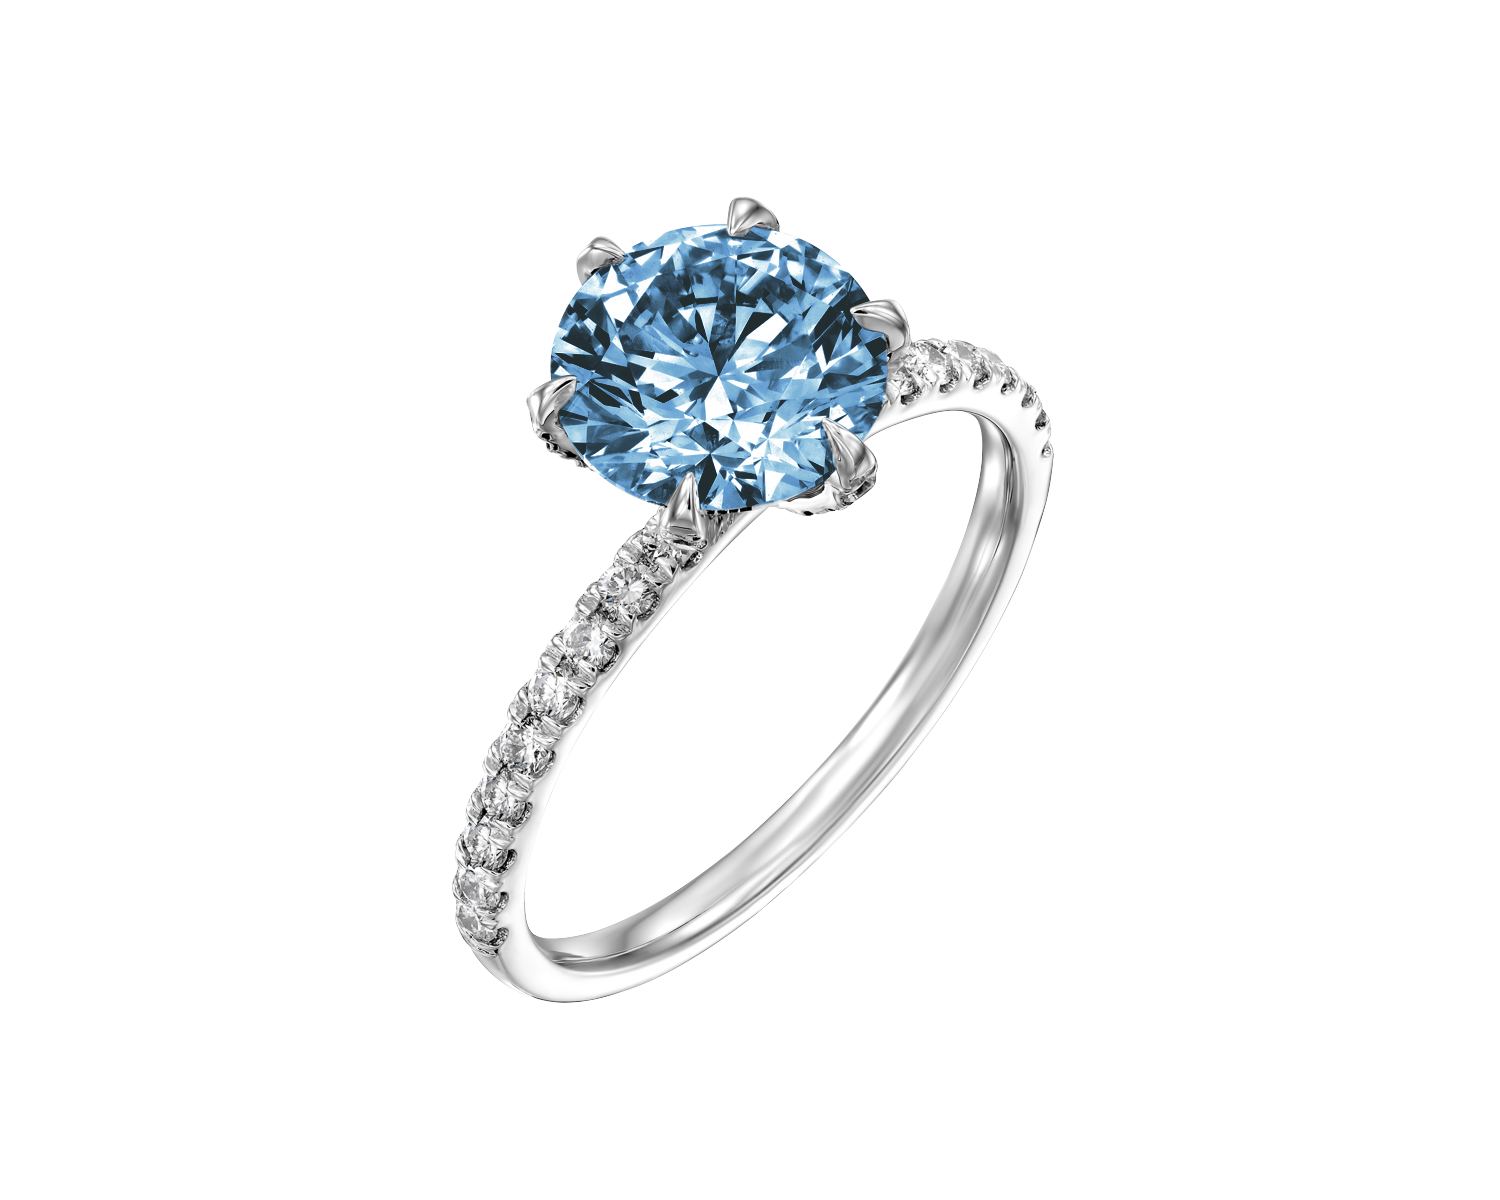 The Acacia - Blue Diamond Pave Engagement Ring